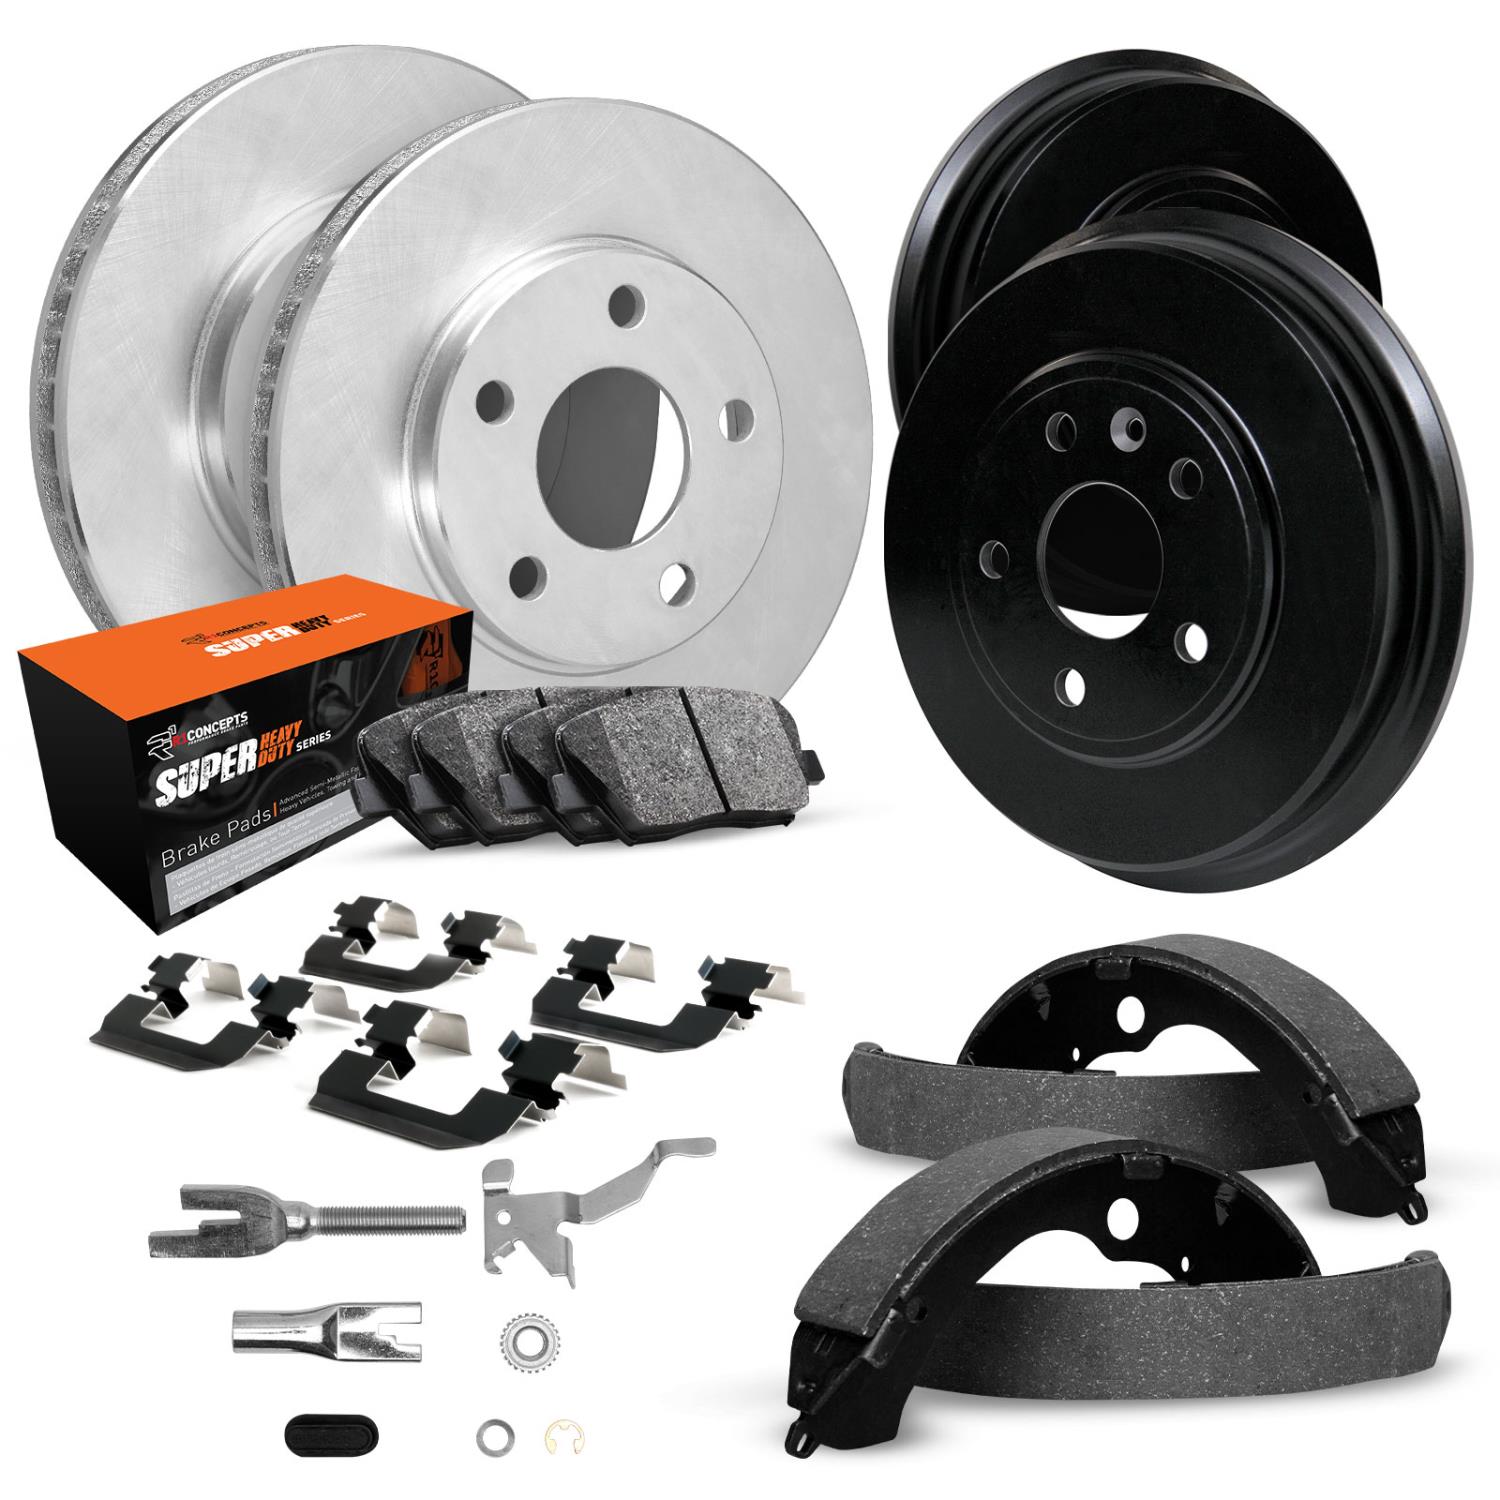 E-Line Blank Brake Rotor & Drum Set w/Super-Duty Pads, Shoes, Hardware, & Adjusters, 1977-1980 Ford/Lincoln/Mercury/Mazda